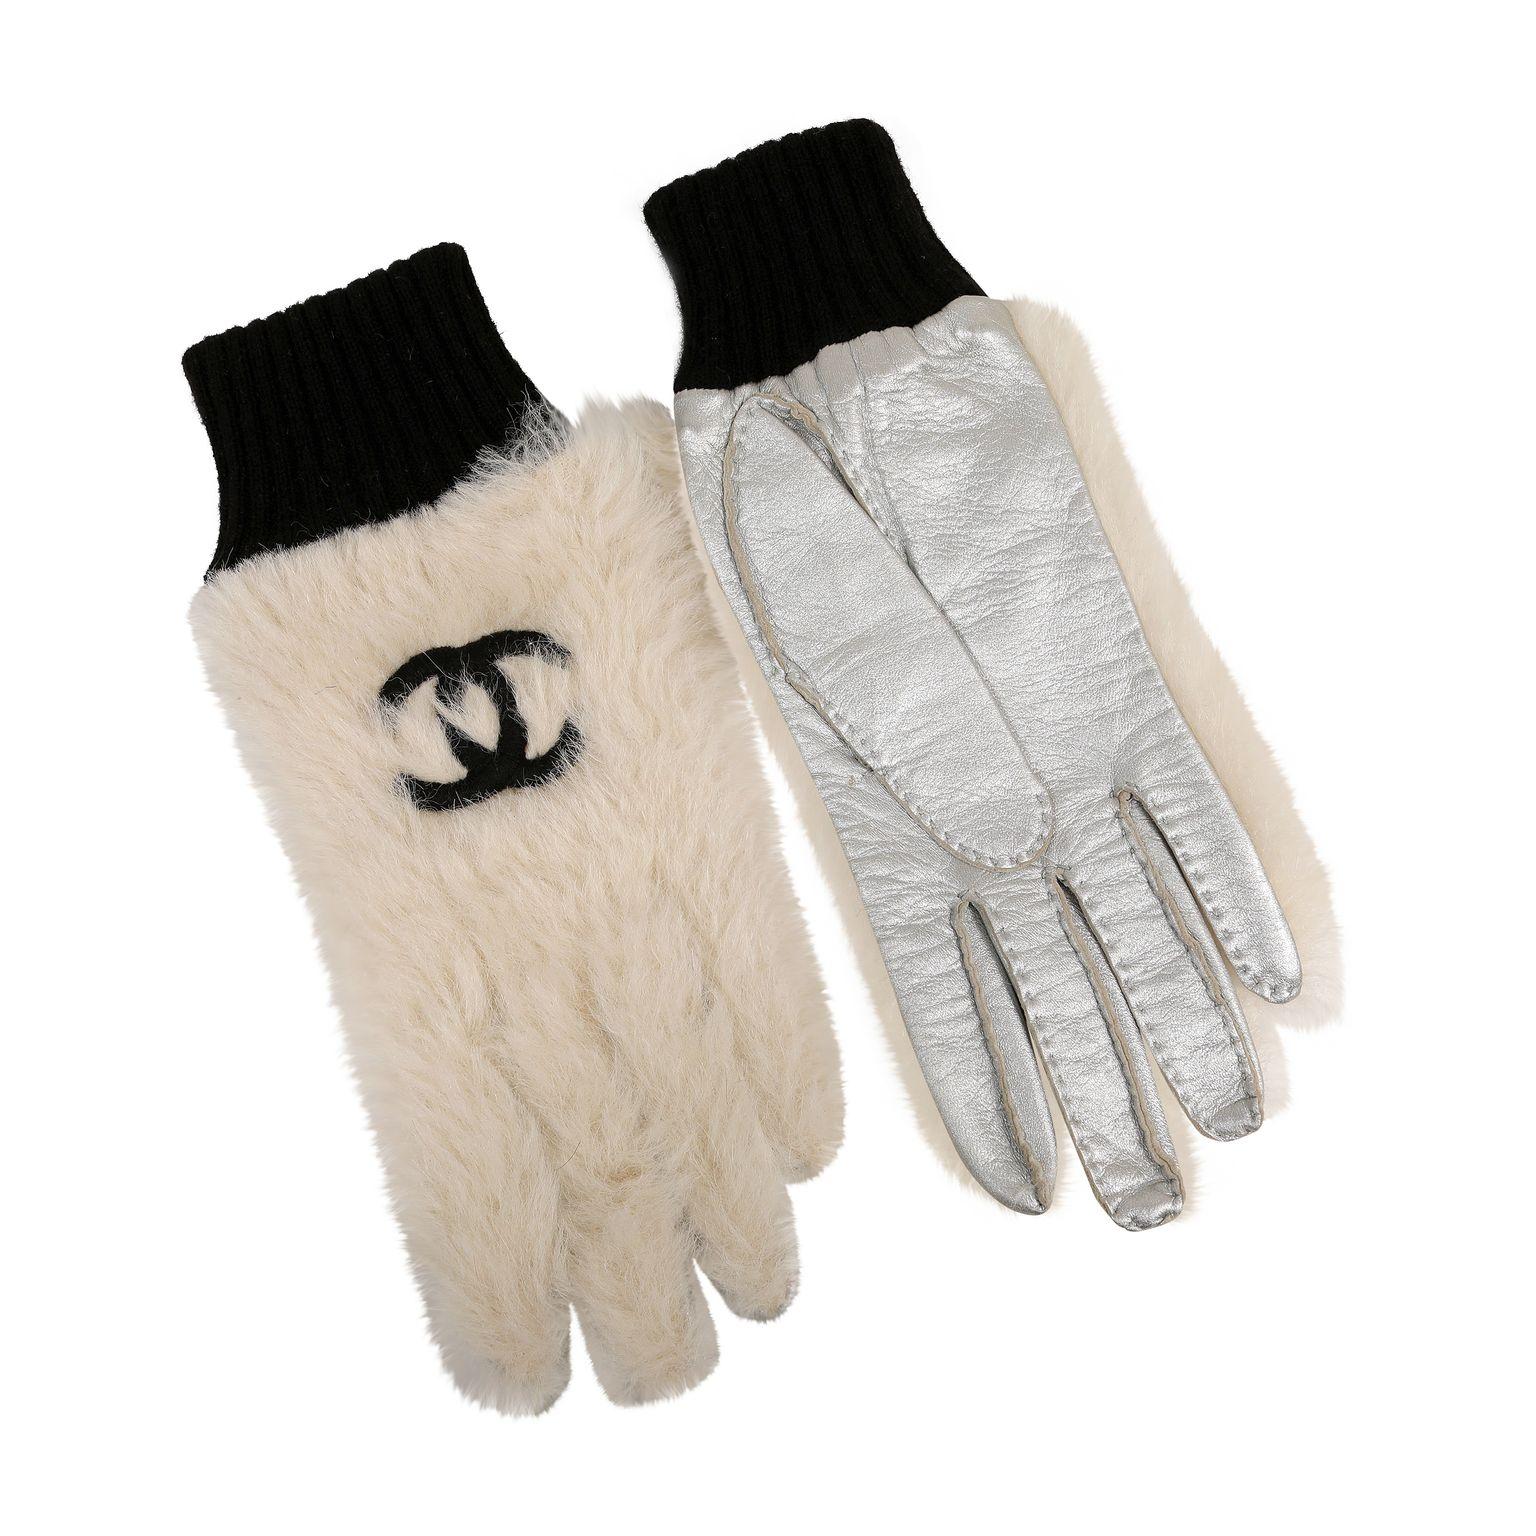 These authentic Chanel White Fur CC Gloves are pristine.  Winter white gloves with black interlocking CC embroidery and black knitted cuffs.  Silver metallic leather on palm side.   Pouch or box included.  

PBF 13739
